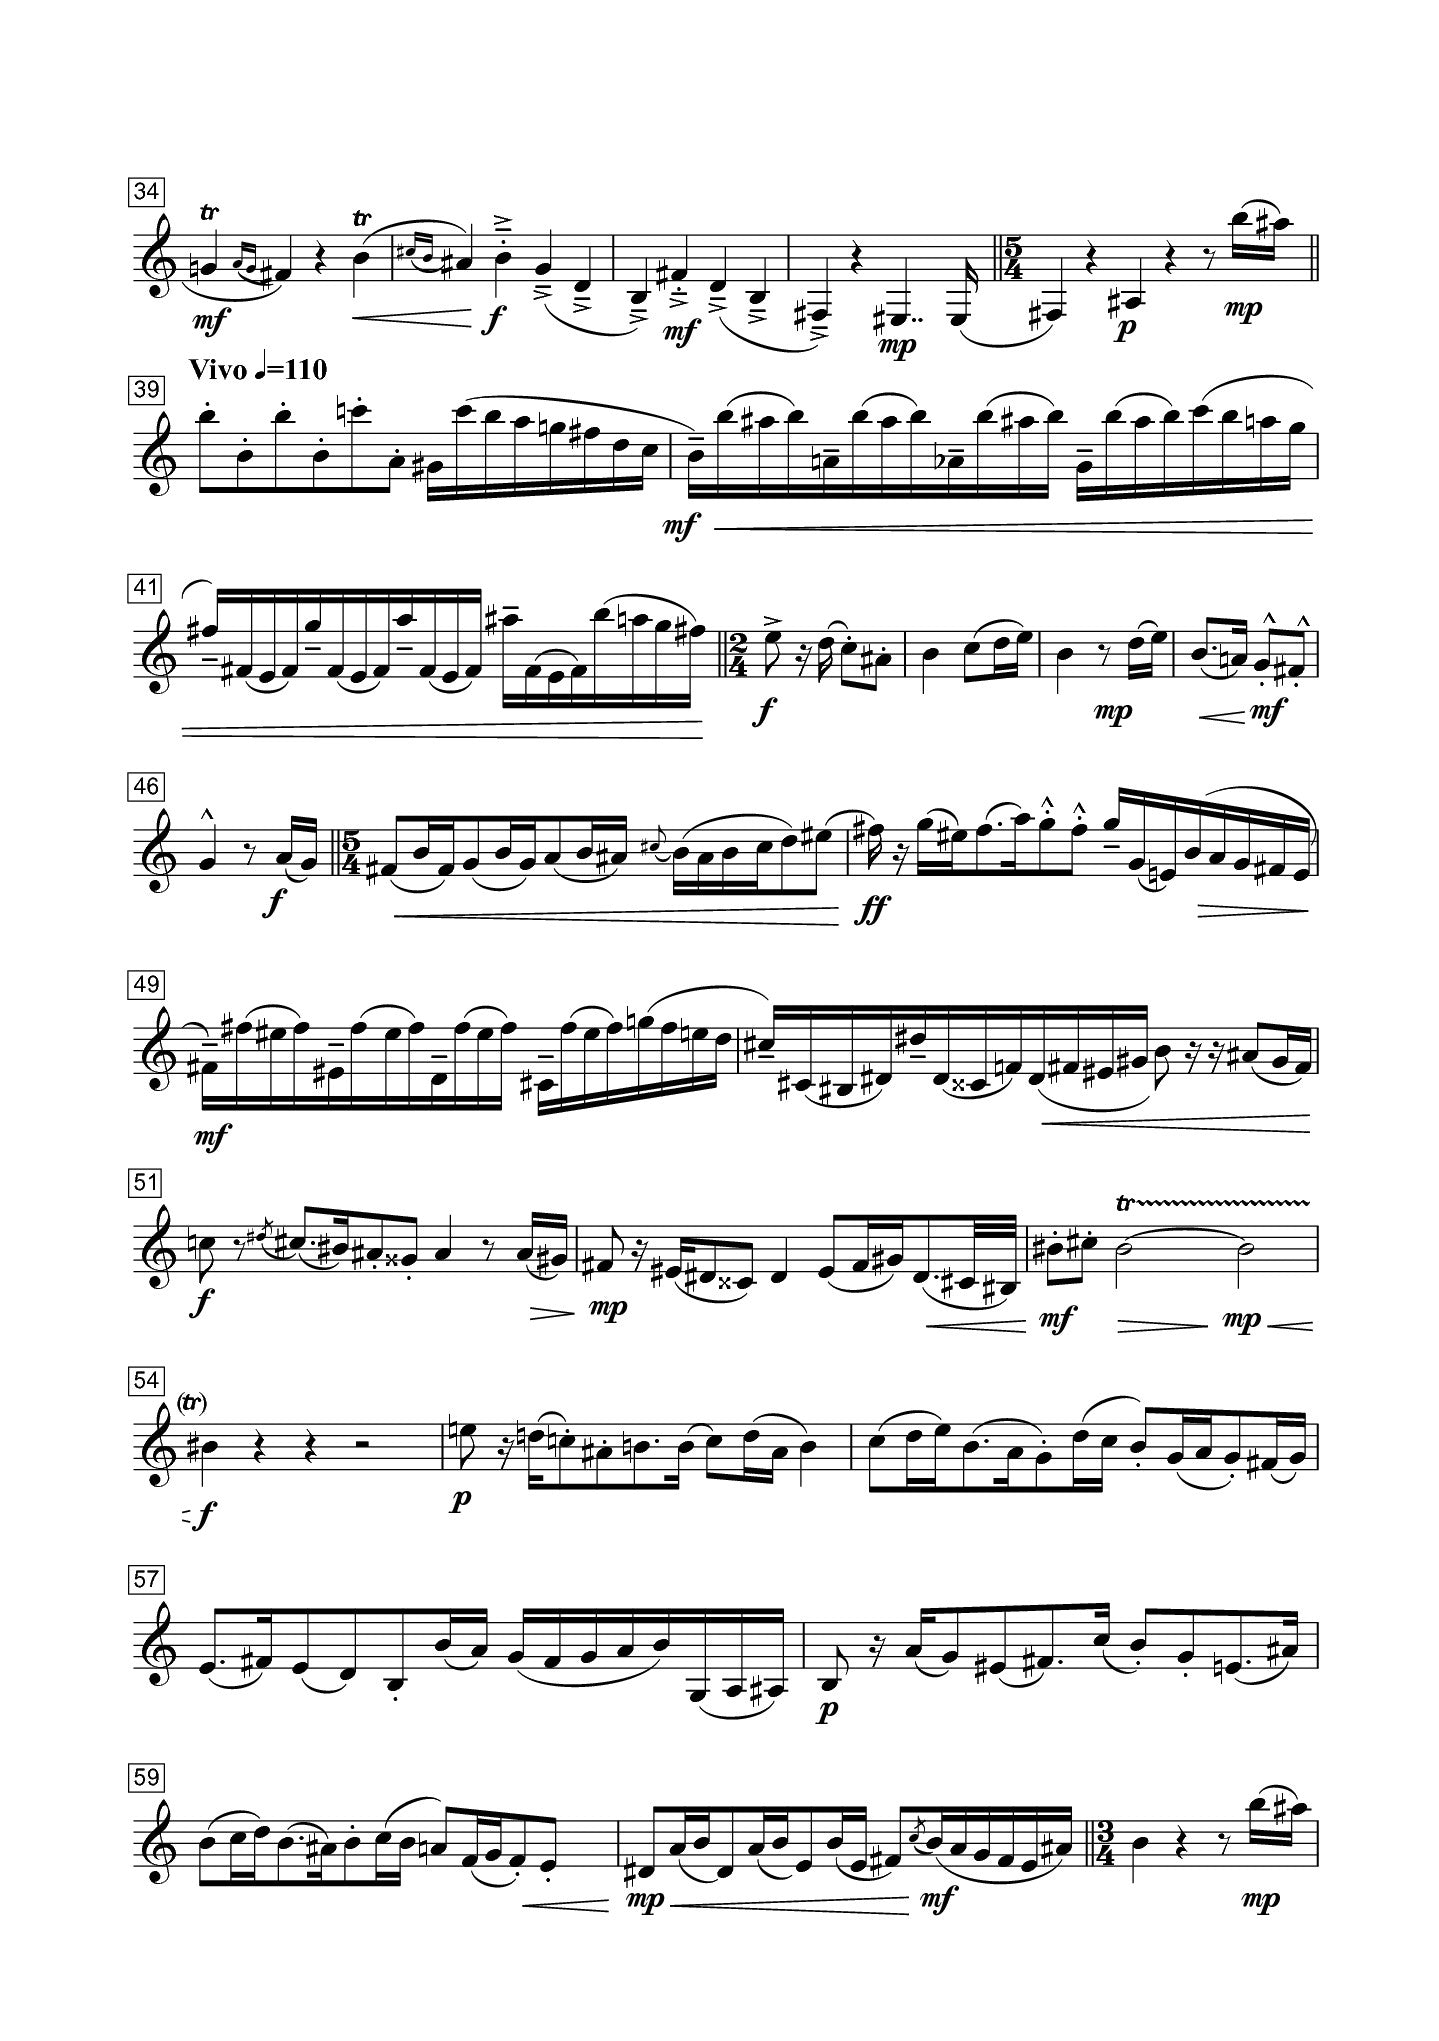 Melody Shop Sheet music for Flute, Clarinet in b-flat, Bassoon, French horn  (Mixed Quintet)